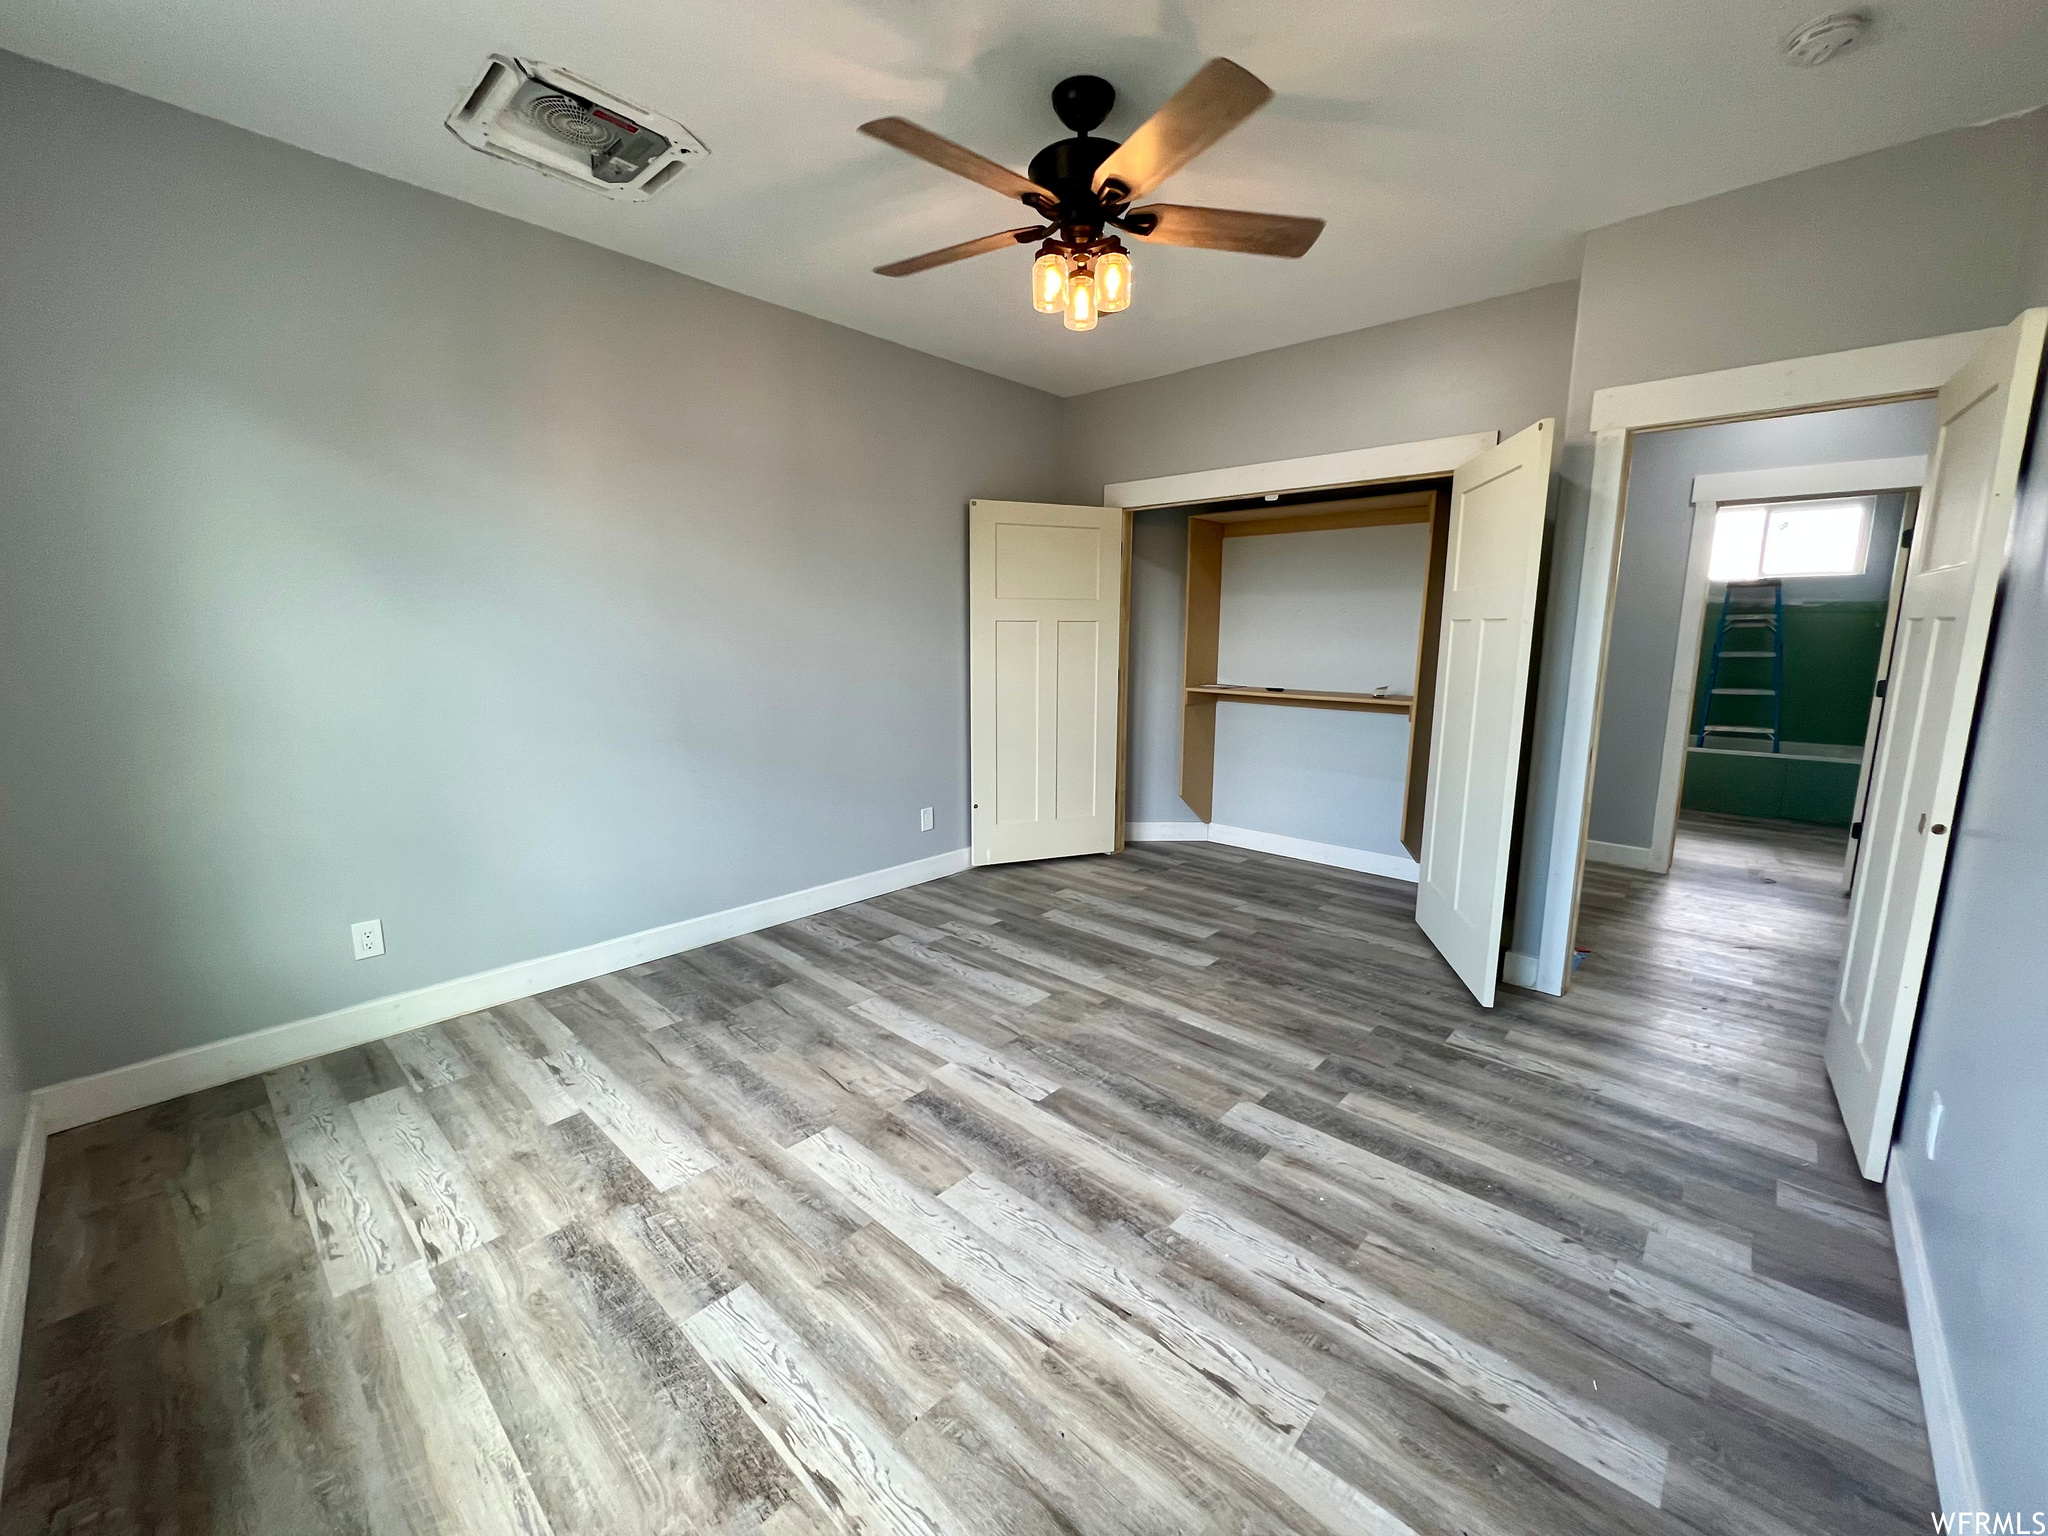 Hardwood floored bedroom featuring a ceiling fan